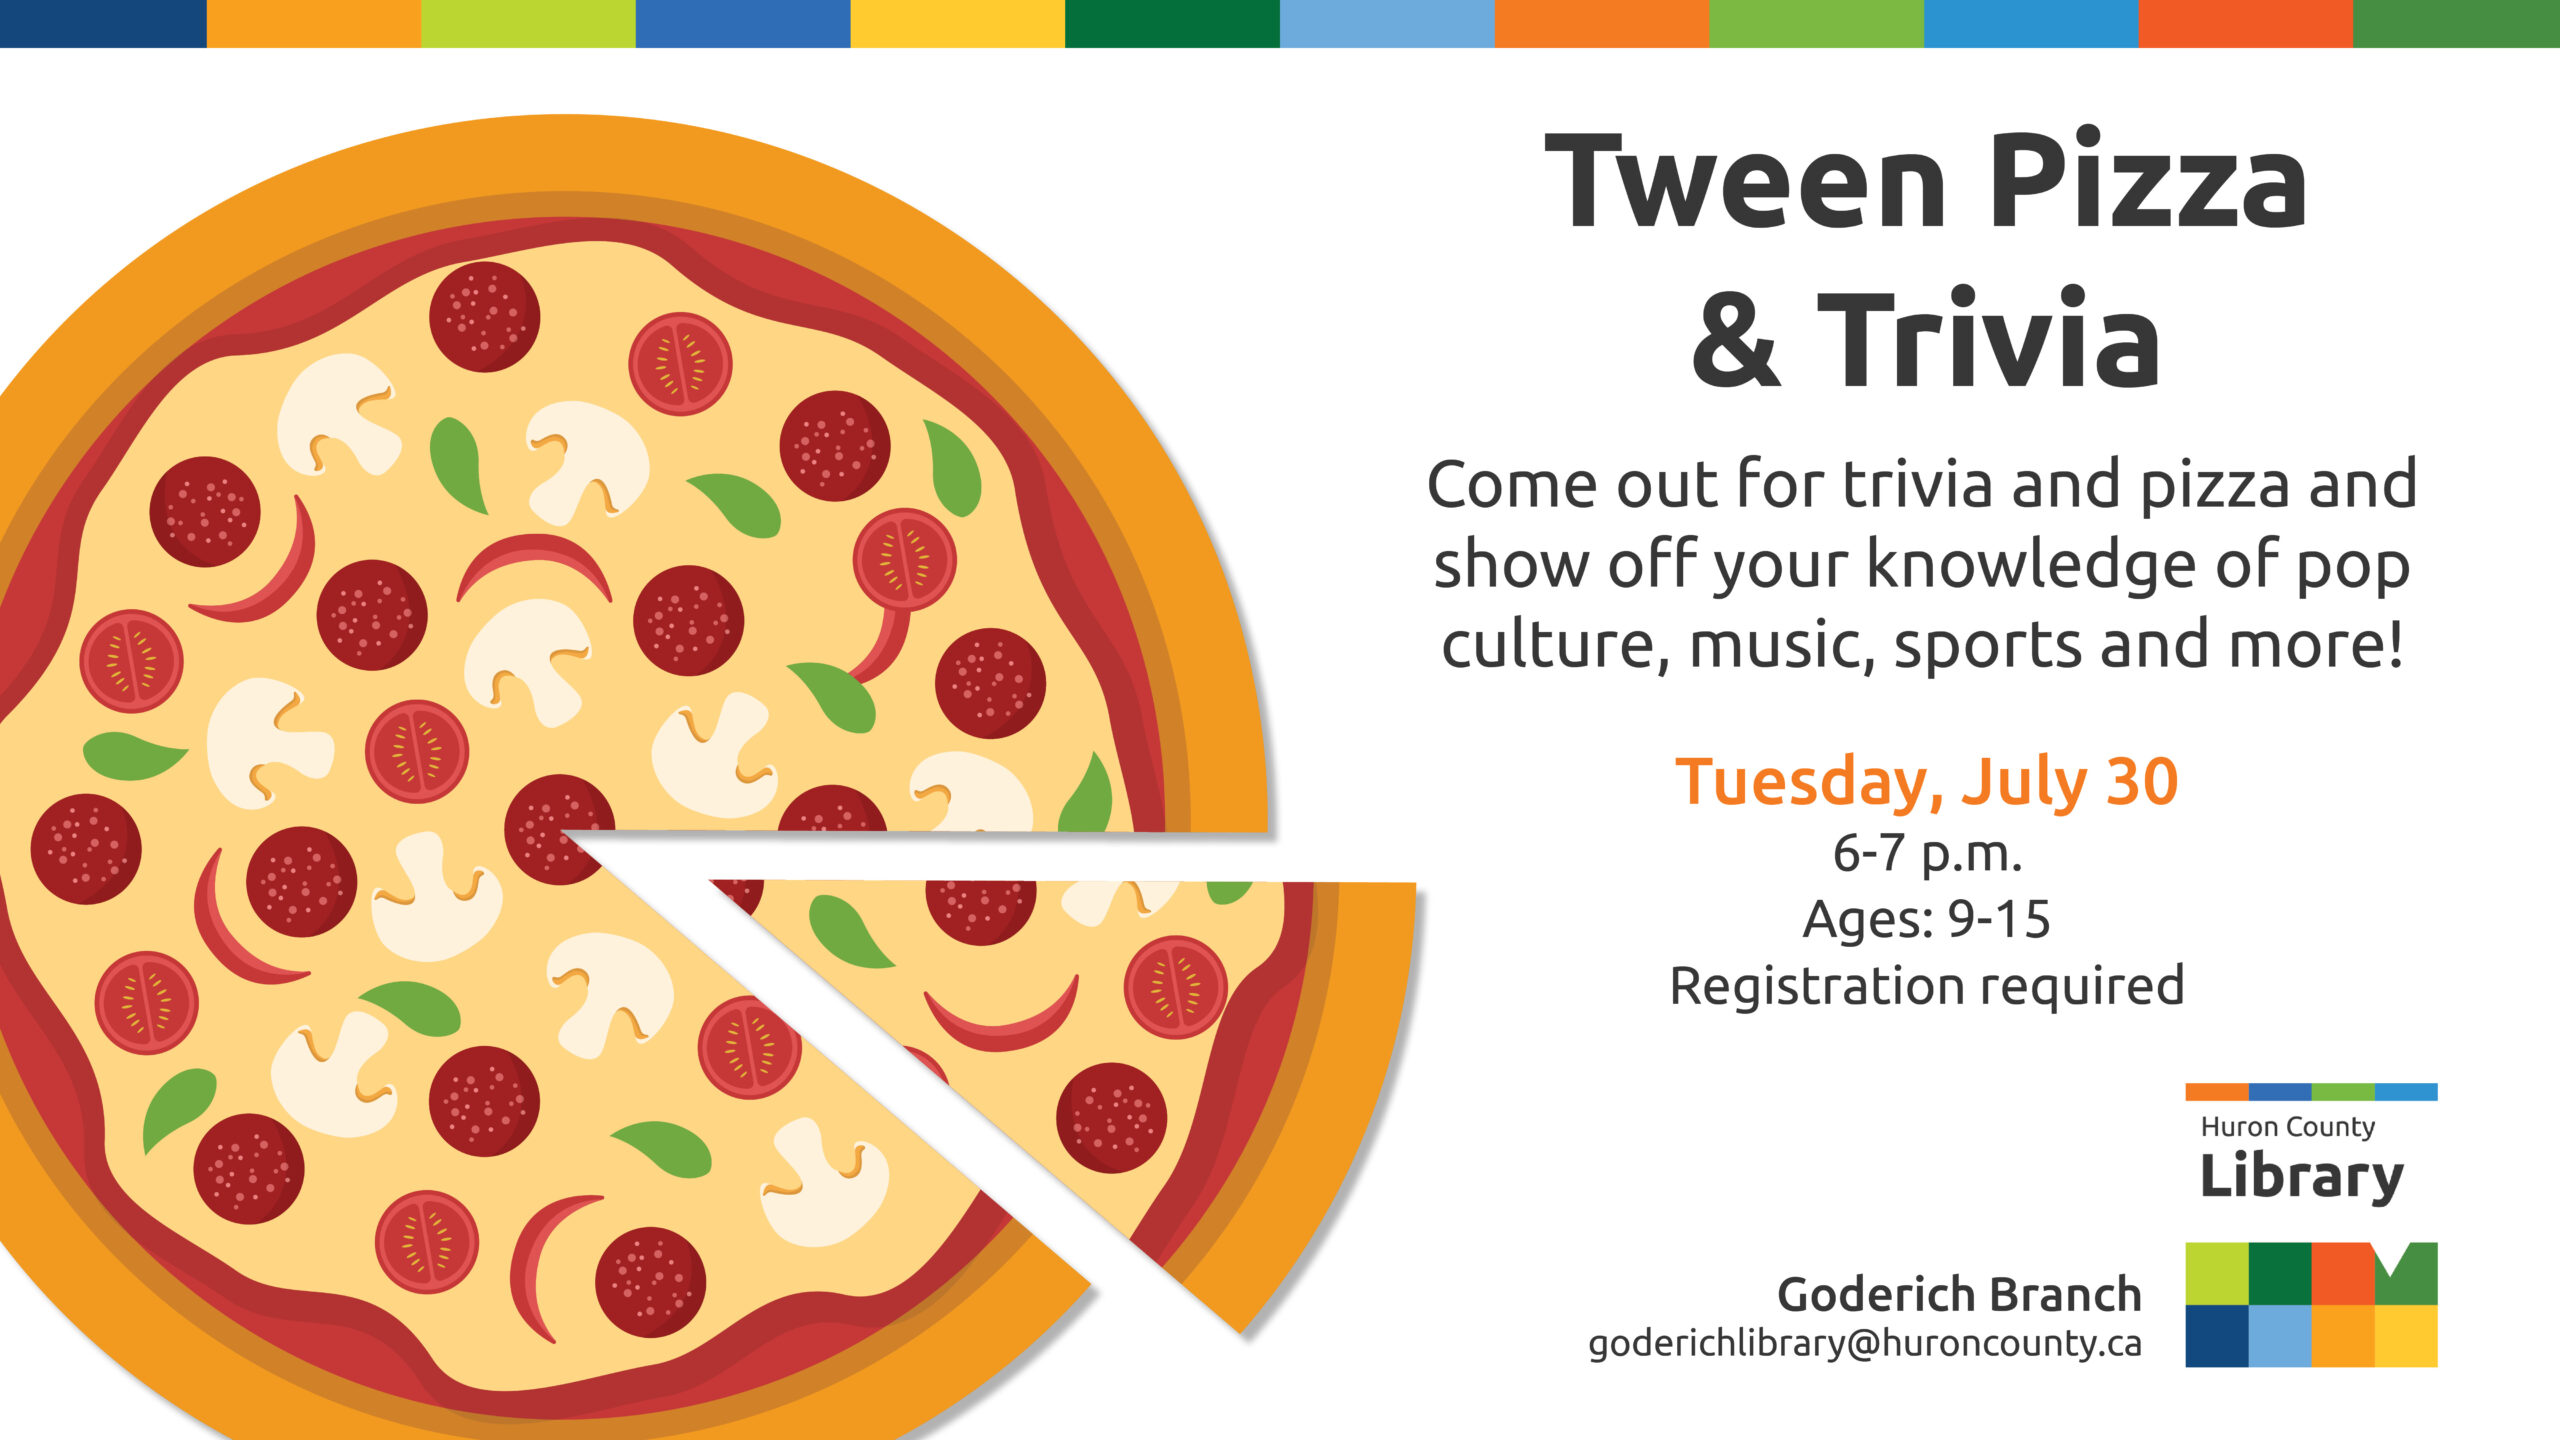 Illustration of a pizza with text promoting trivia and pizza at Goderich